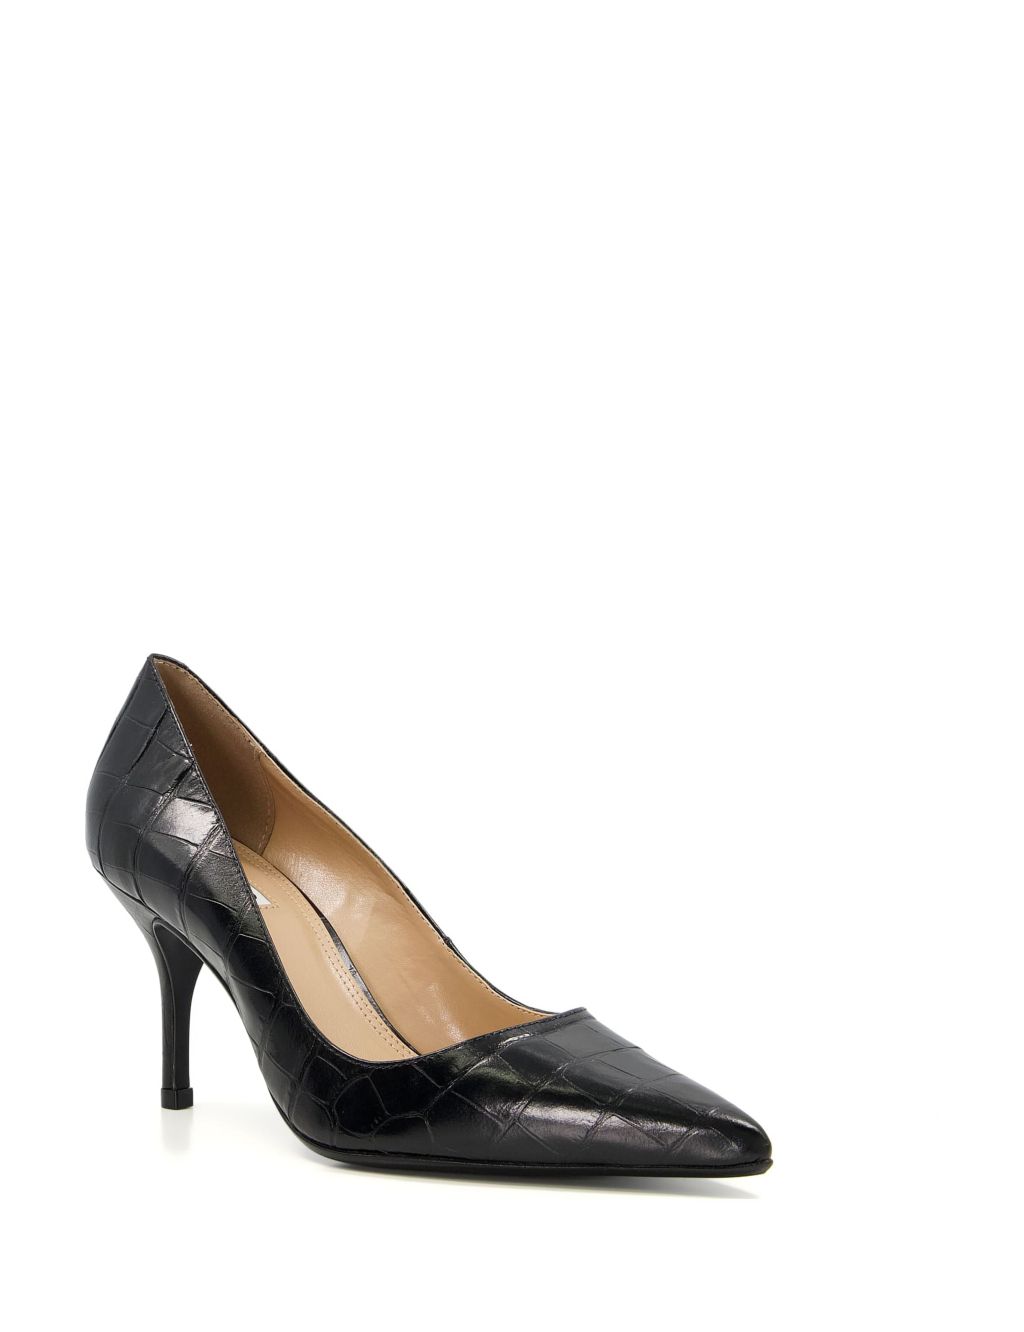 Leather Croc Stiletto Pointed Court Shoes image 1